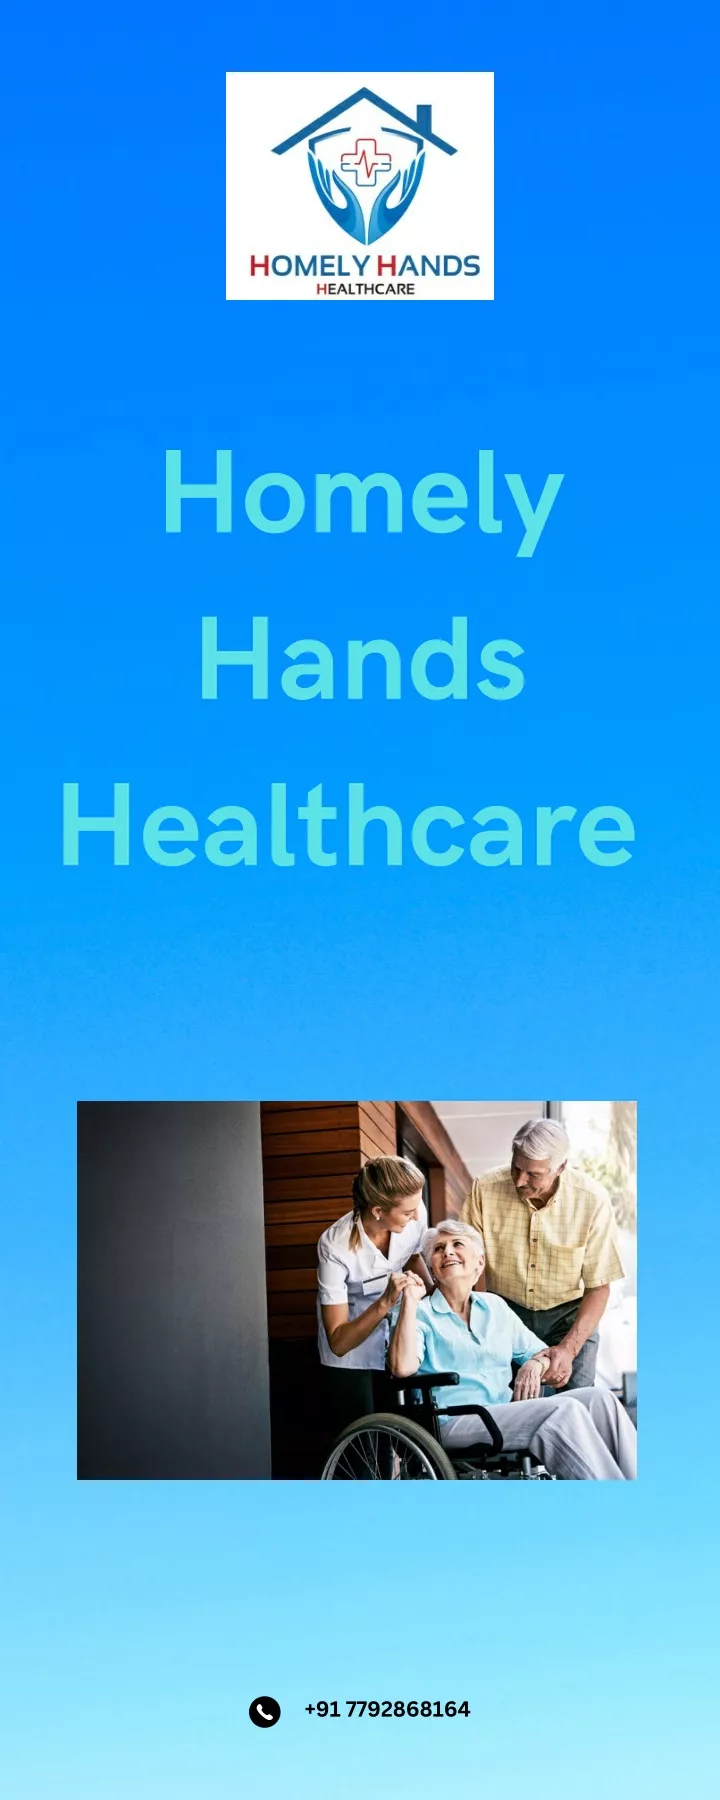 homely hands healthcare